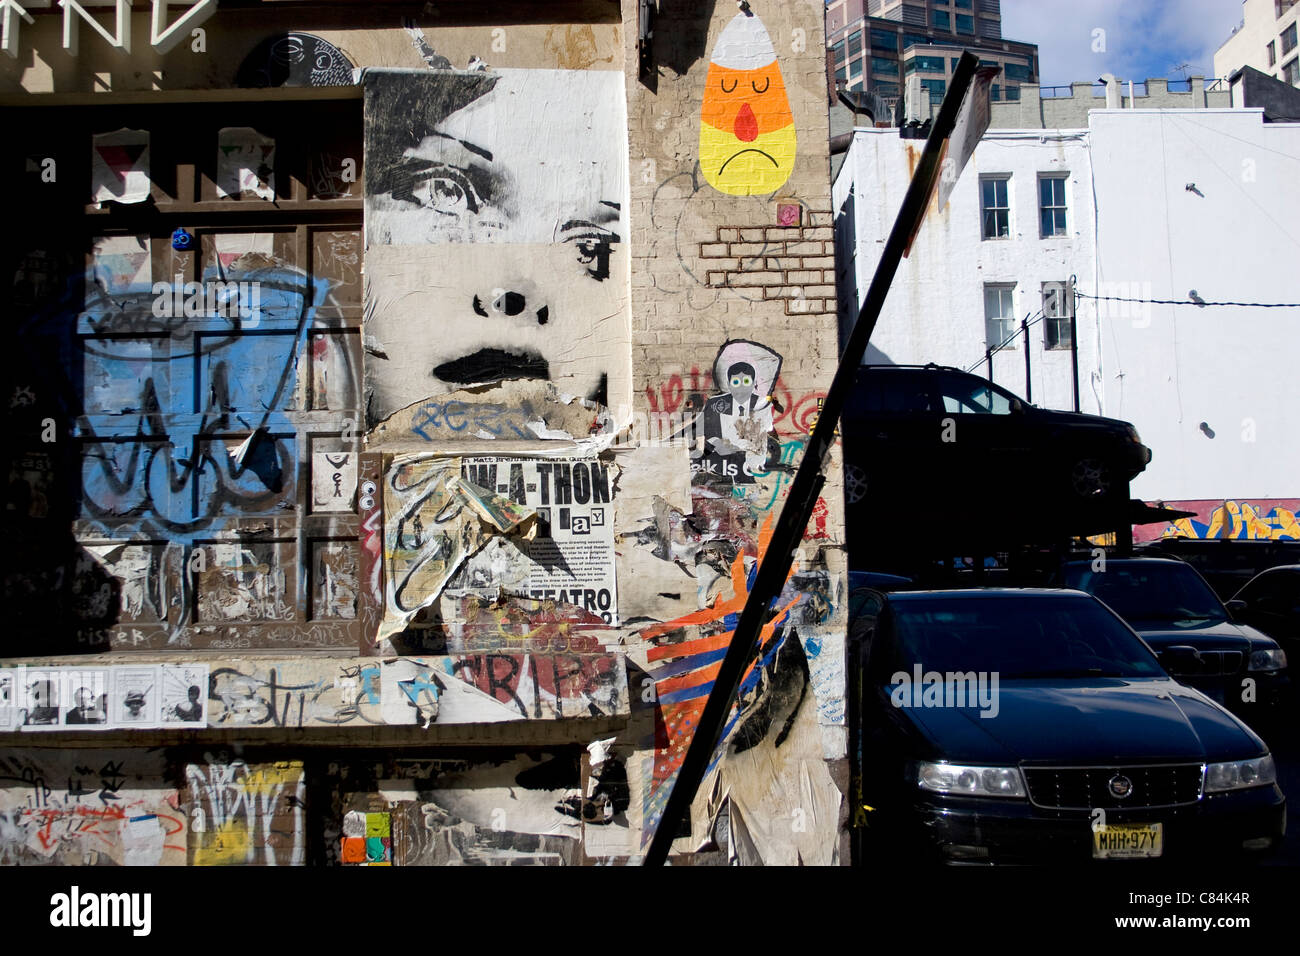 graffiti on wall in Tribecca, NYC, image shows some parked cars and a chaotic collections of images, painted and glued onto wall Stock Photo